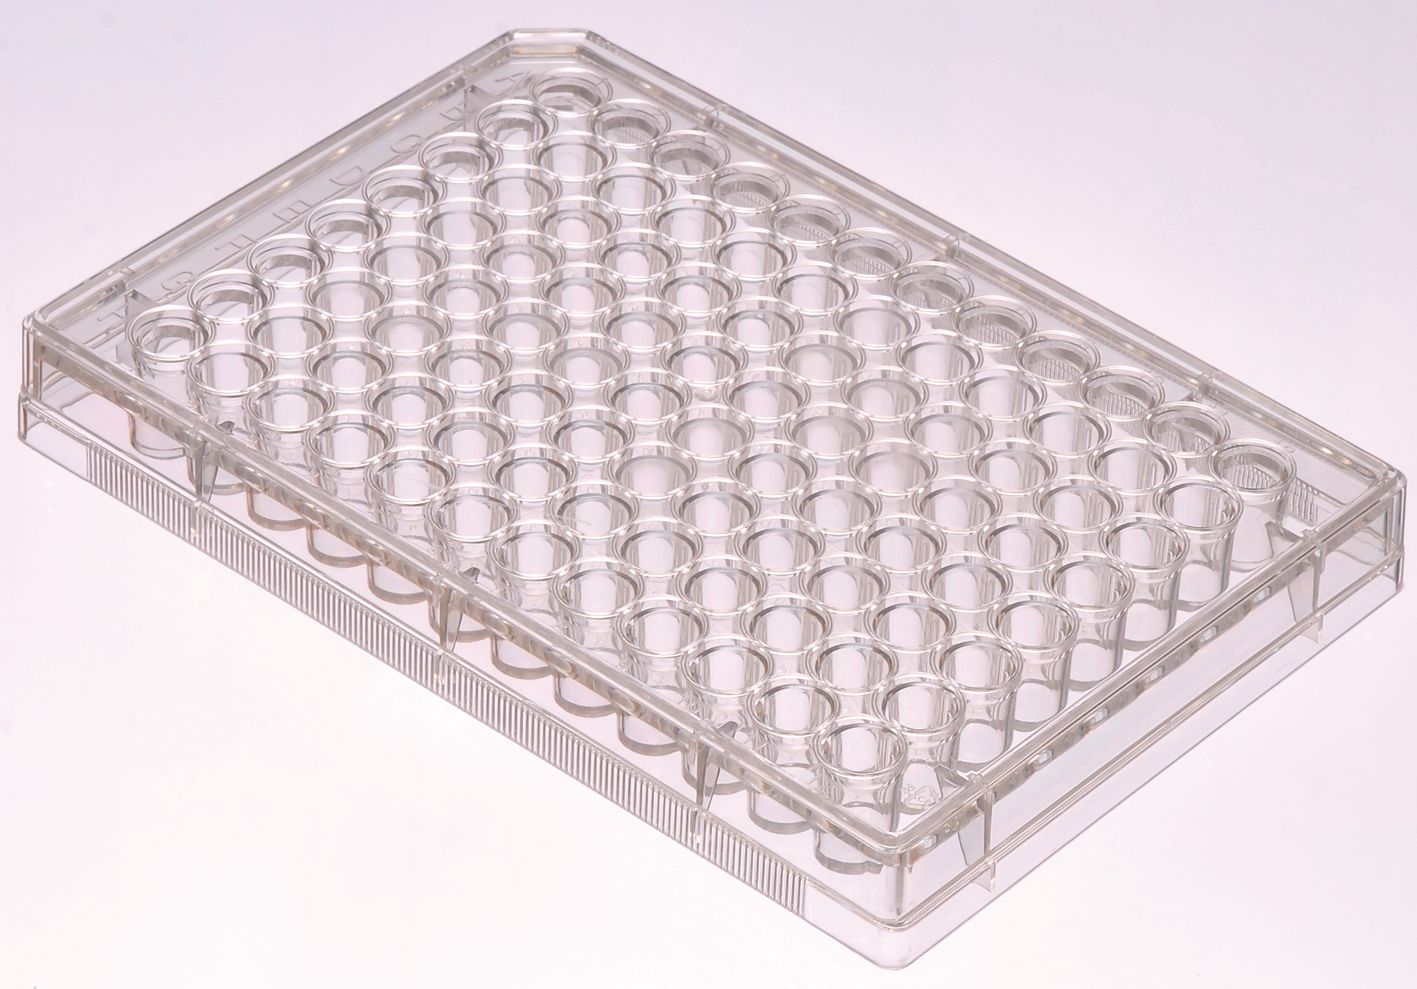 Multiwell cell culture plate (96 well), Non-treated, Sterilized